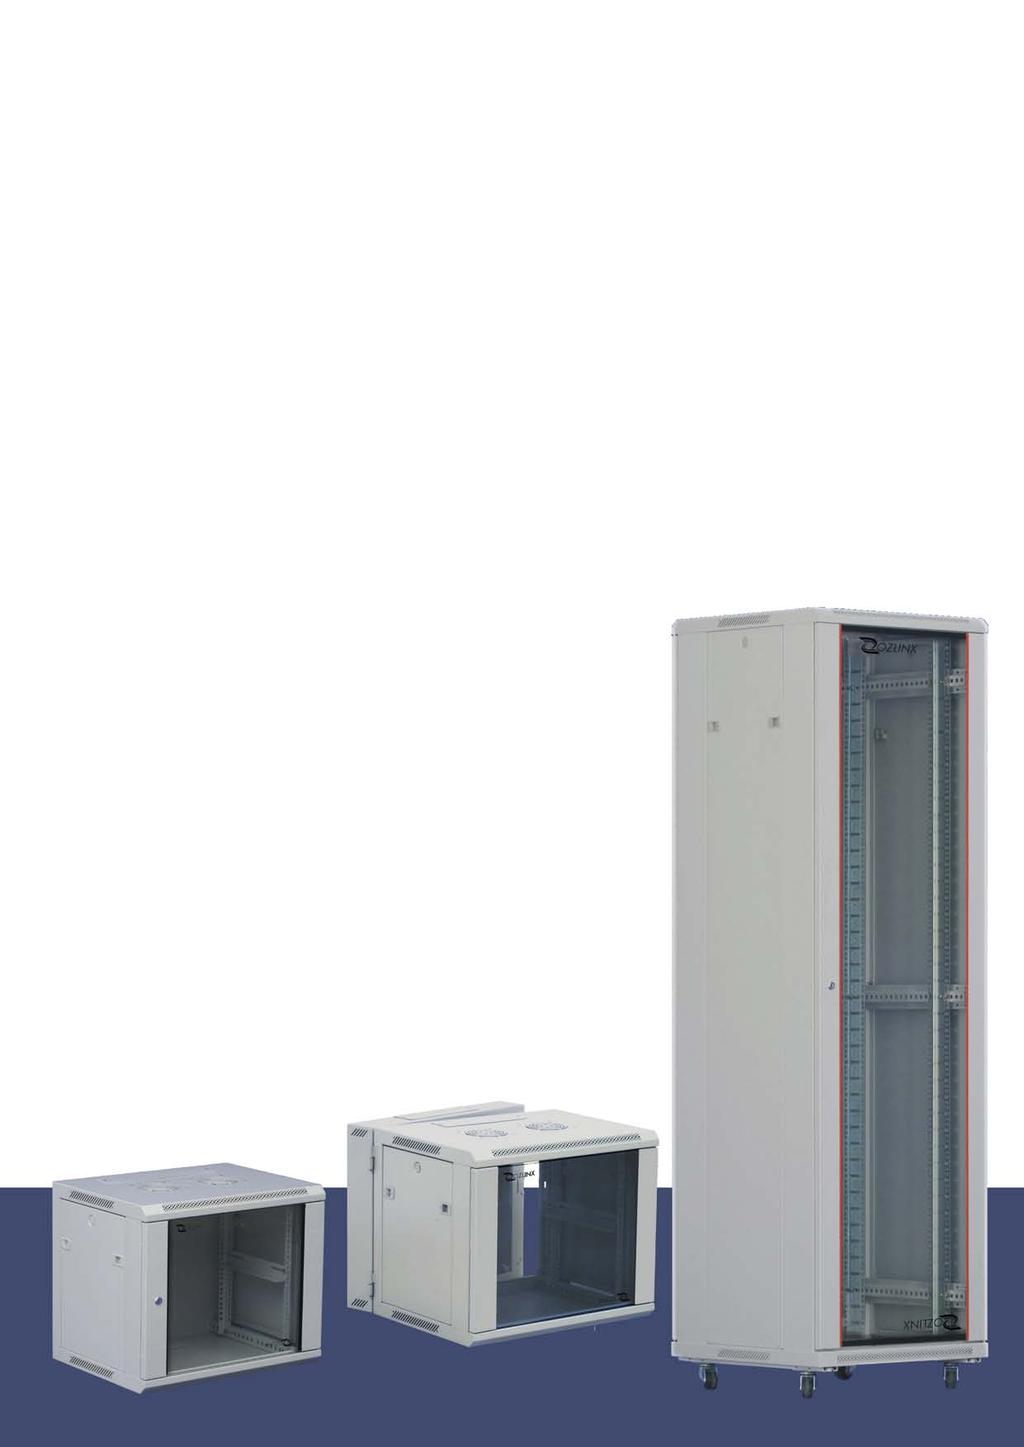 OZLINX Cabinets OZLINX Cabinets OZLINX cabinets combine high quality and real value, ranging from the wall mount 9U to